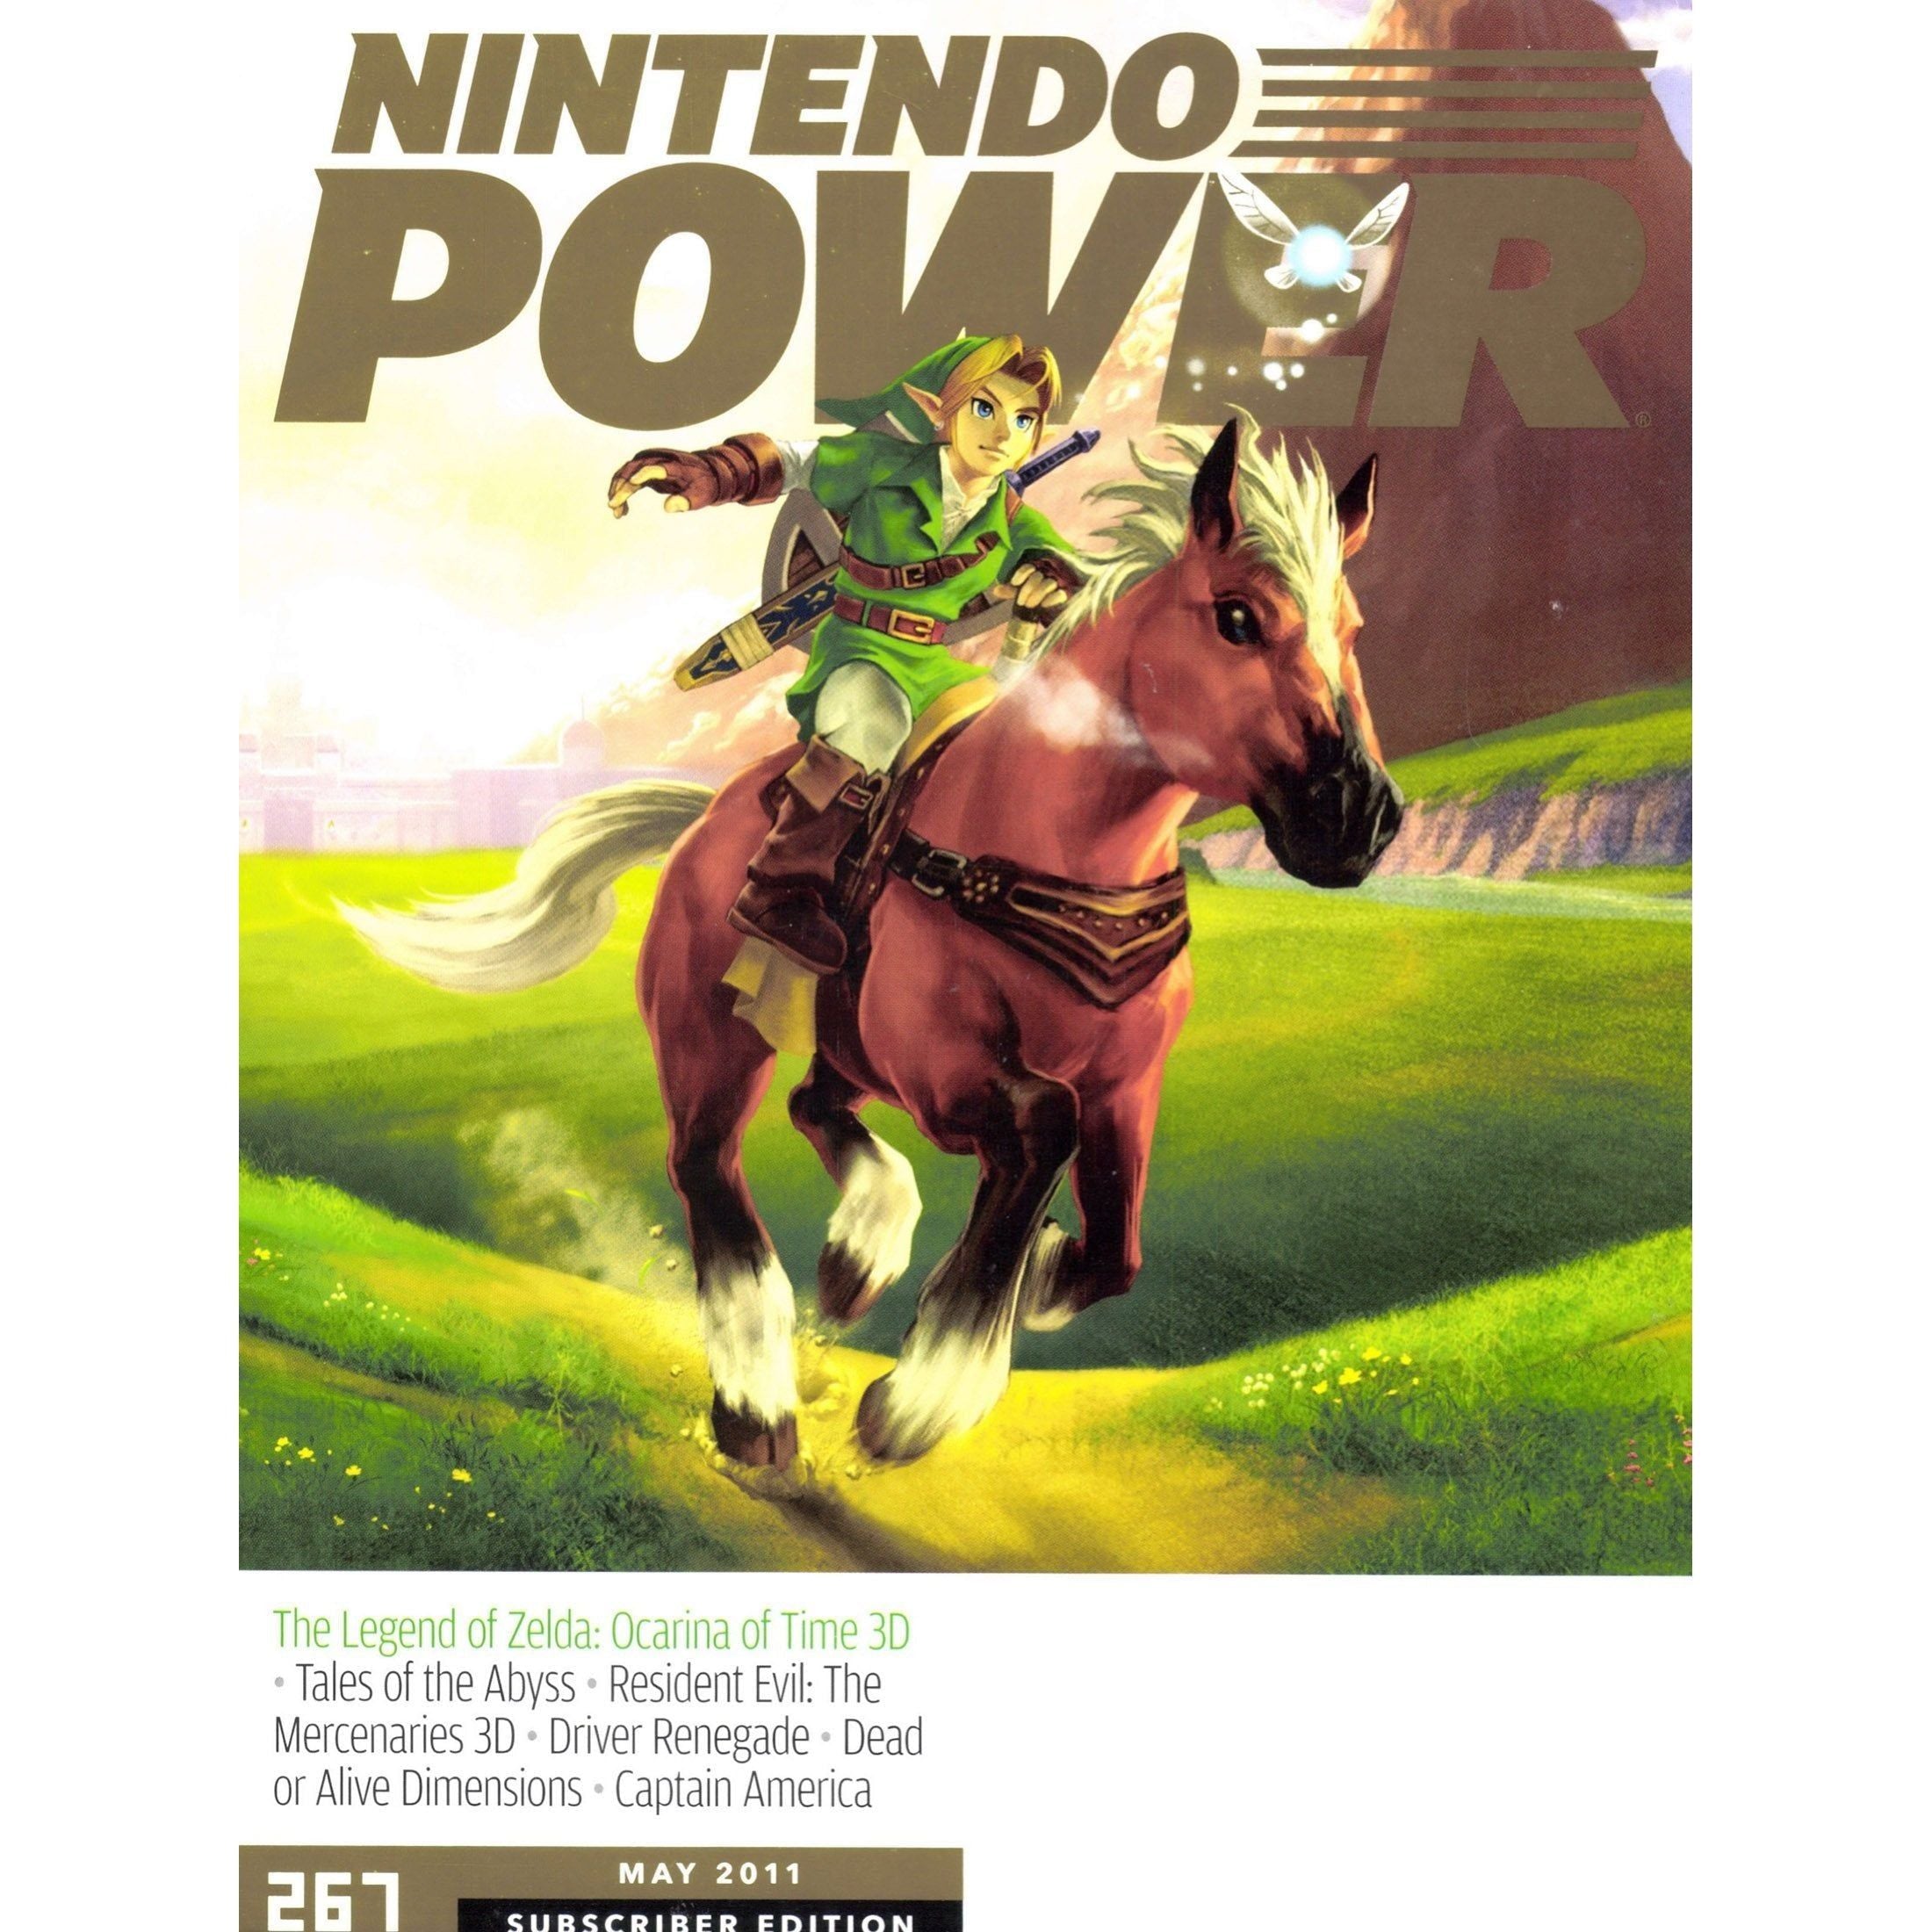 Nintendo Power Magazine (#267 Subscriber Edition) - Complete and/or Good Condition